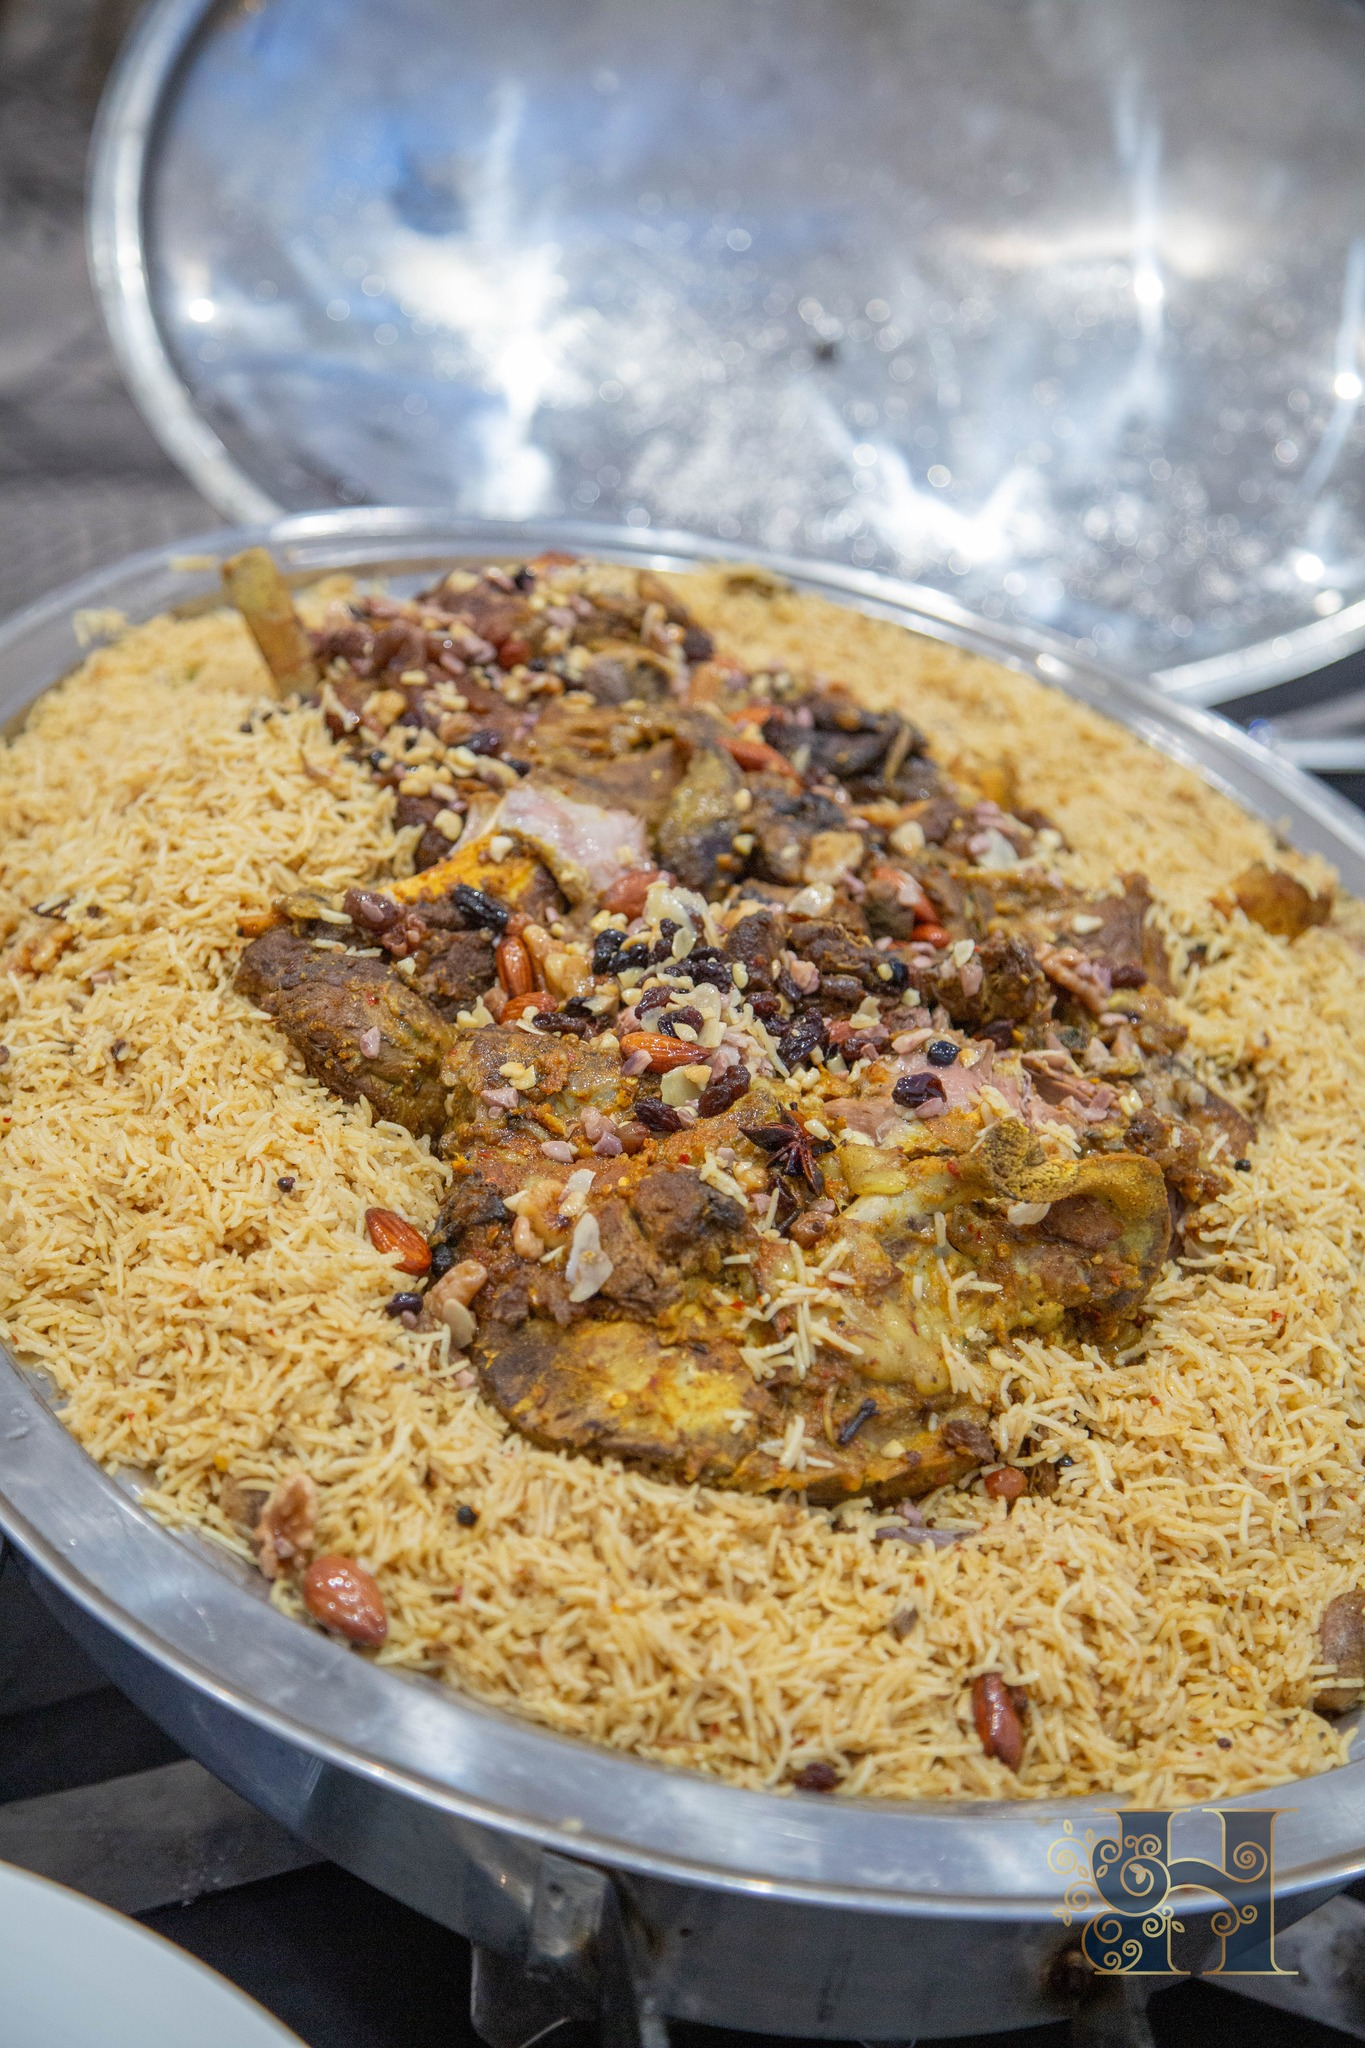 Delicious and aromatic Himalayan Granville Chicken Biryani.